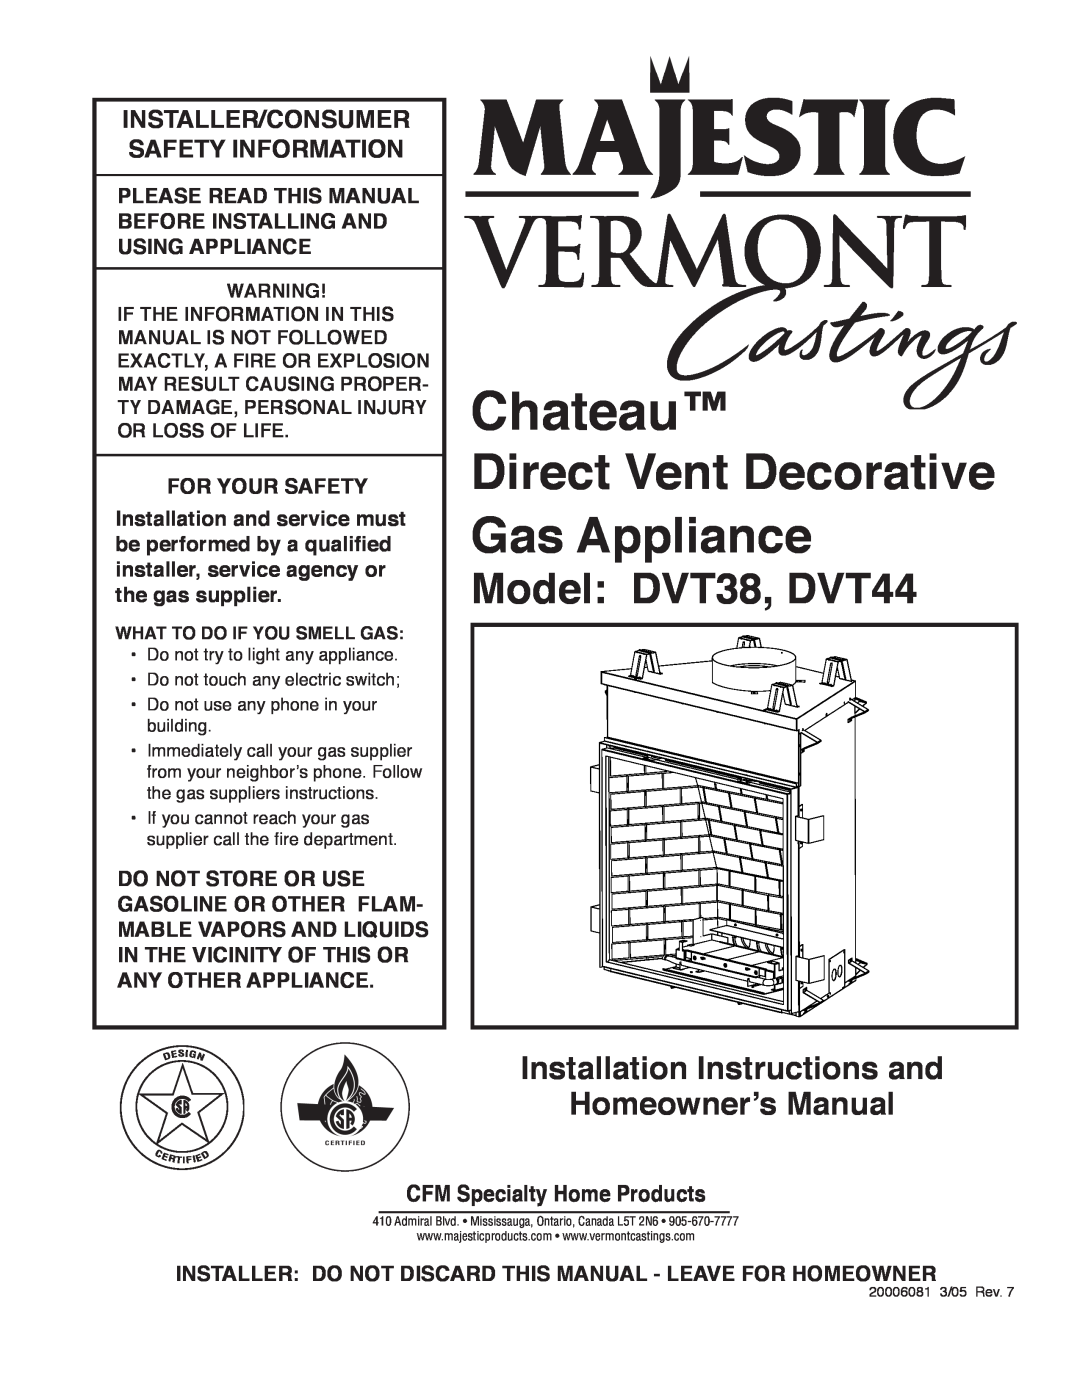 Vermont Casting installation instructions Model DVT38, DVT44, Installation Instructions and Homeownerʼs Manual, Chateau 